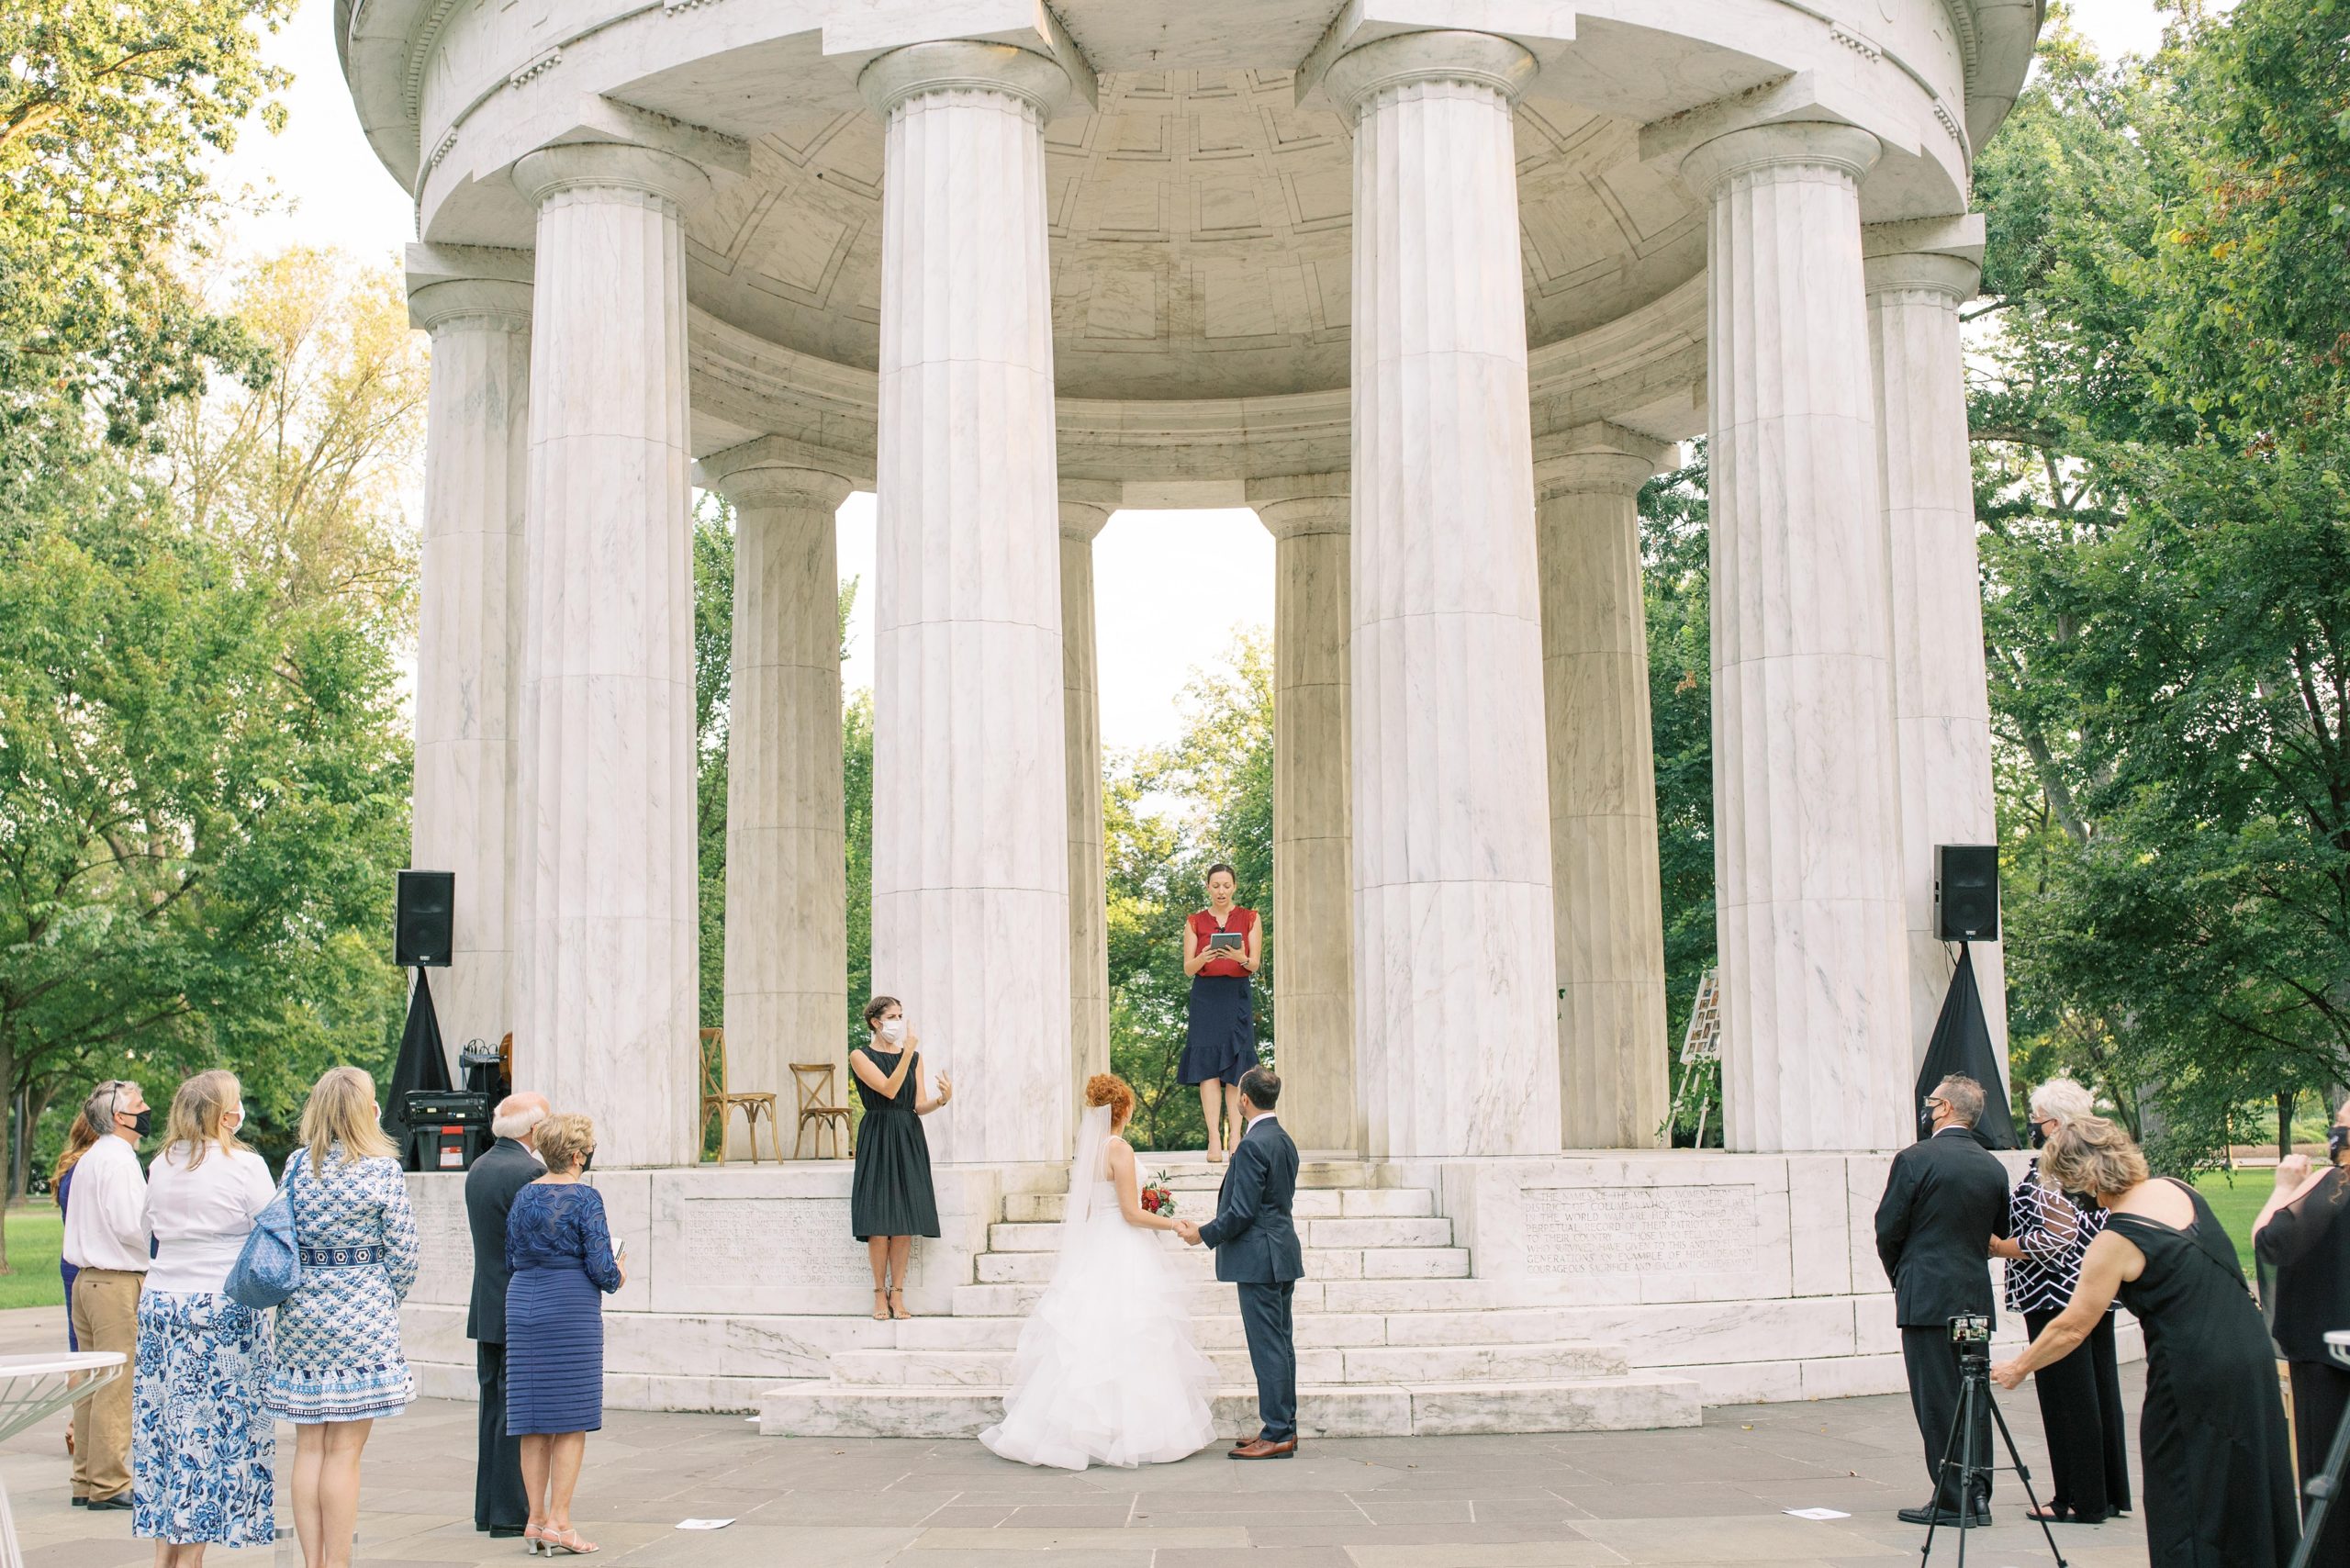 This romantic and intimate DC War Memorial wedding is featured in the spring/summer 2021 issue of The Knot Magazine.